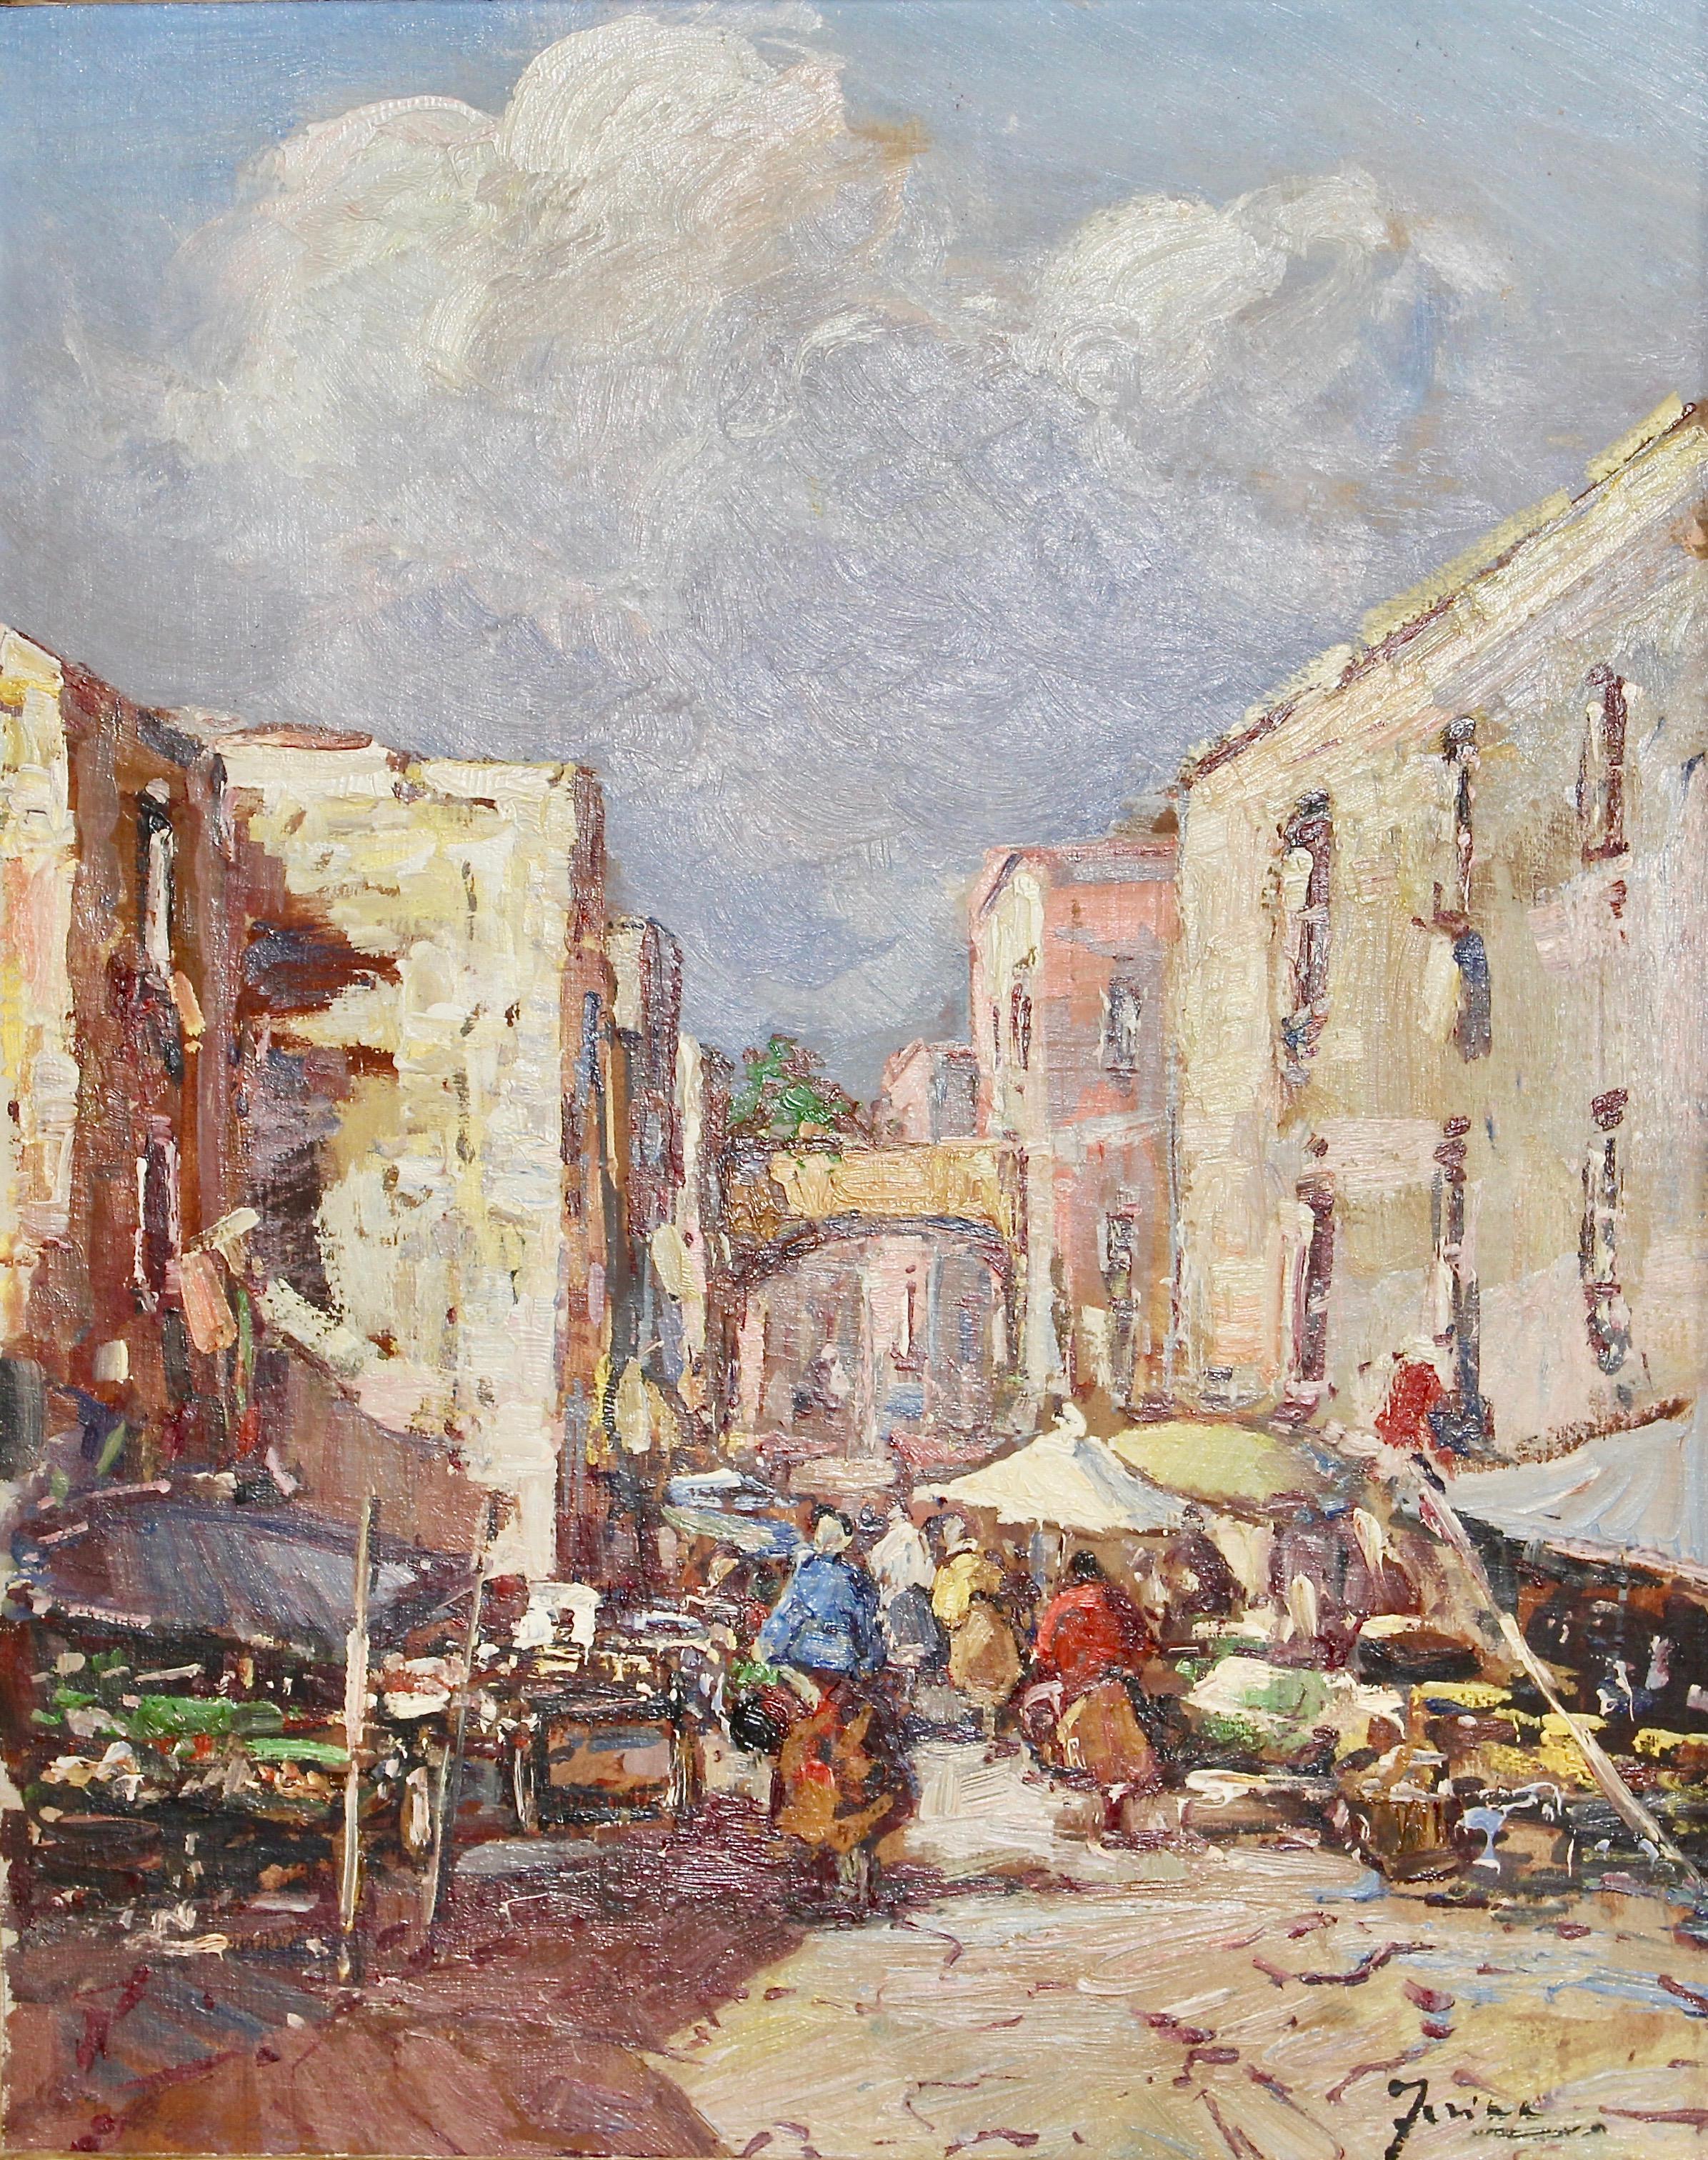 Unknown Figurative Painting - Decorative Painting, Oil on canvas. Oriental Market Scene. 